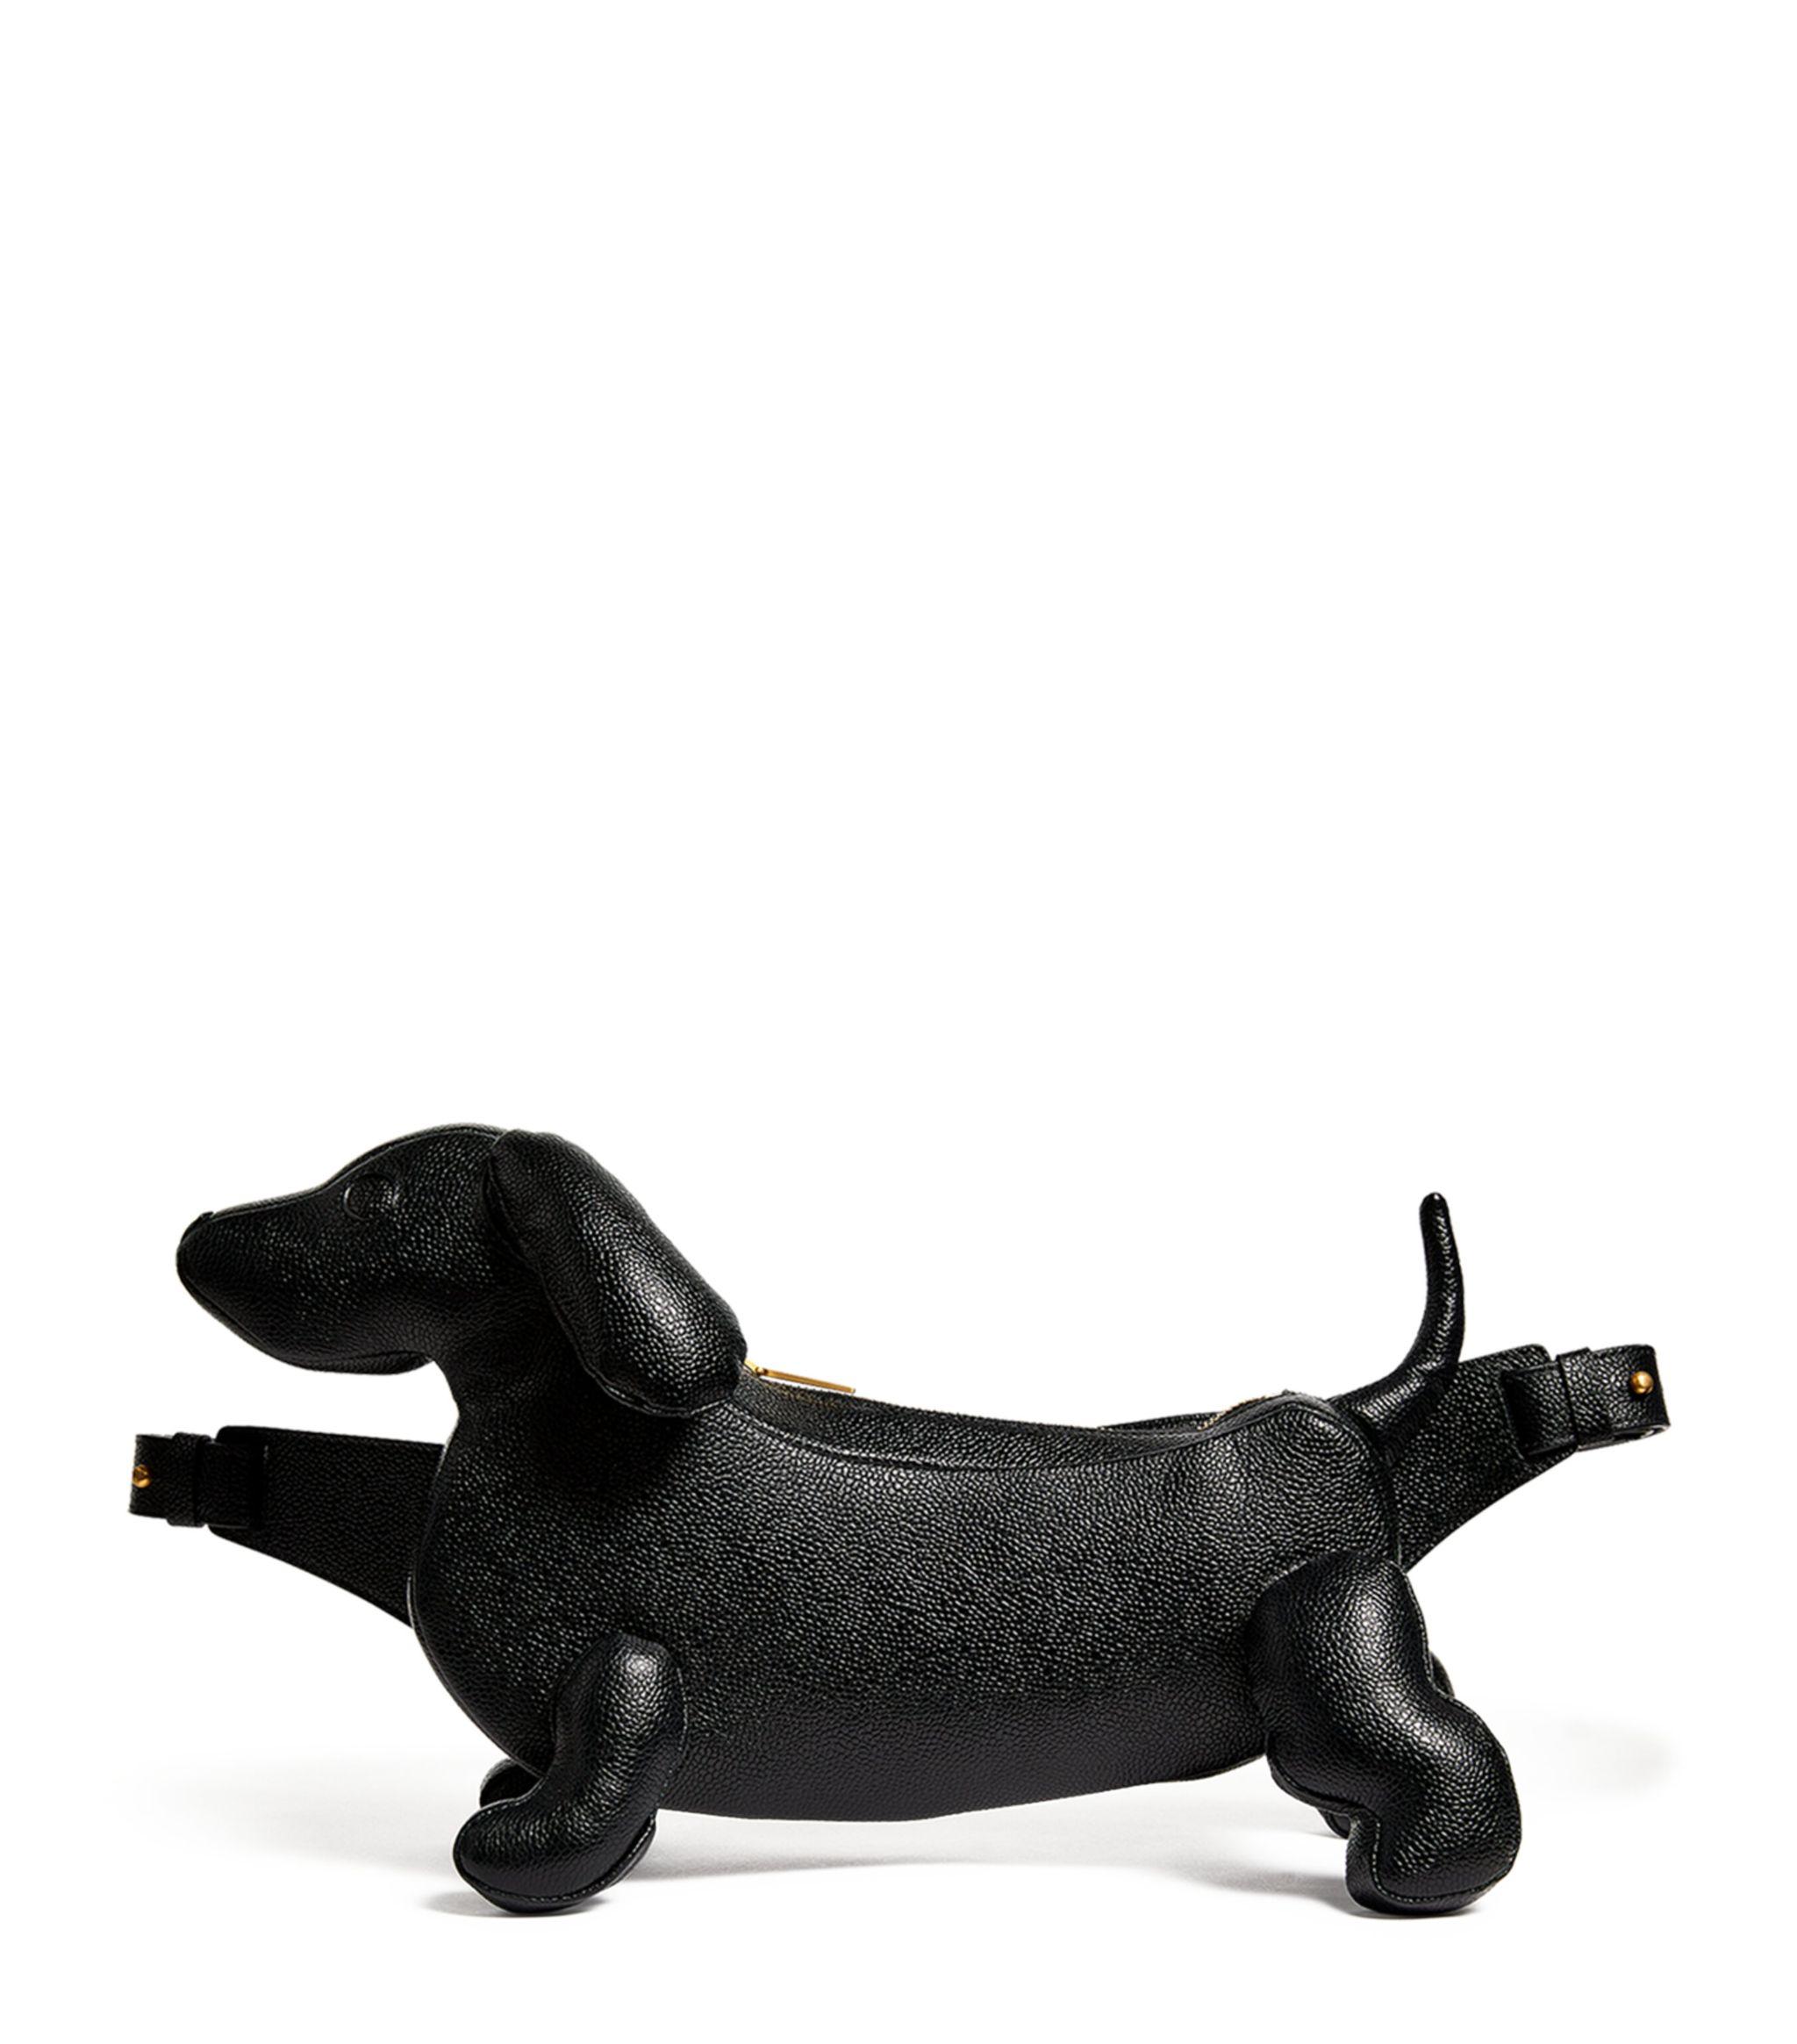 Thom Browne Hector Dog-Shaped Pebbled Leather Bag  Black duffle bag,  Leather duffle bag, Mens leather bag